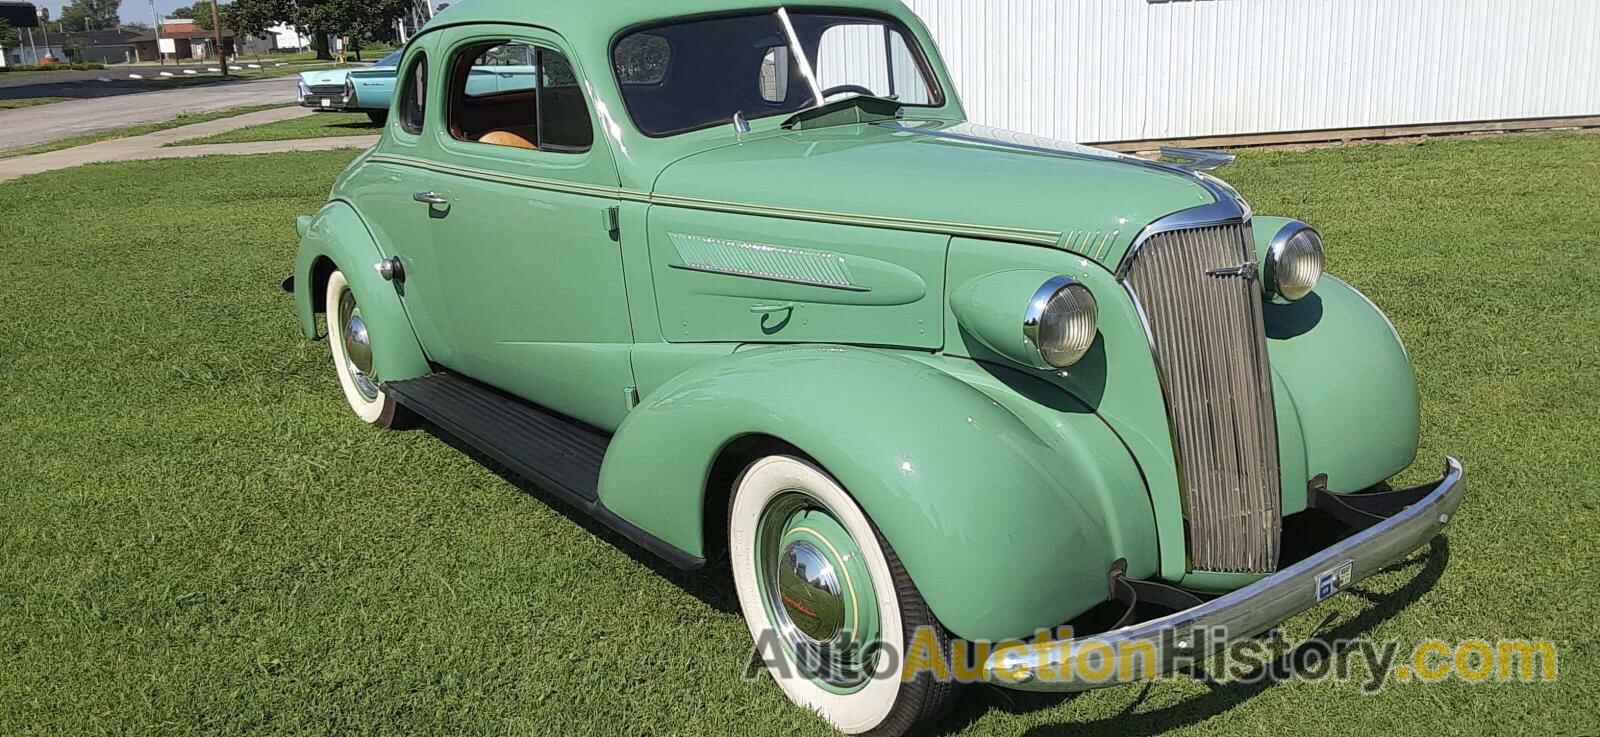 1937 CHEVROLET ALL OTHER, 21GA0850519